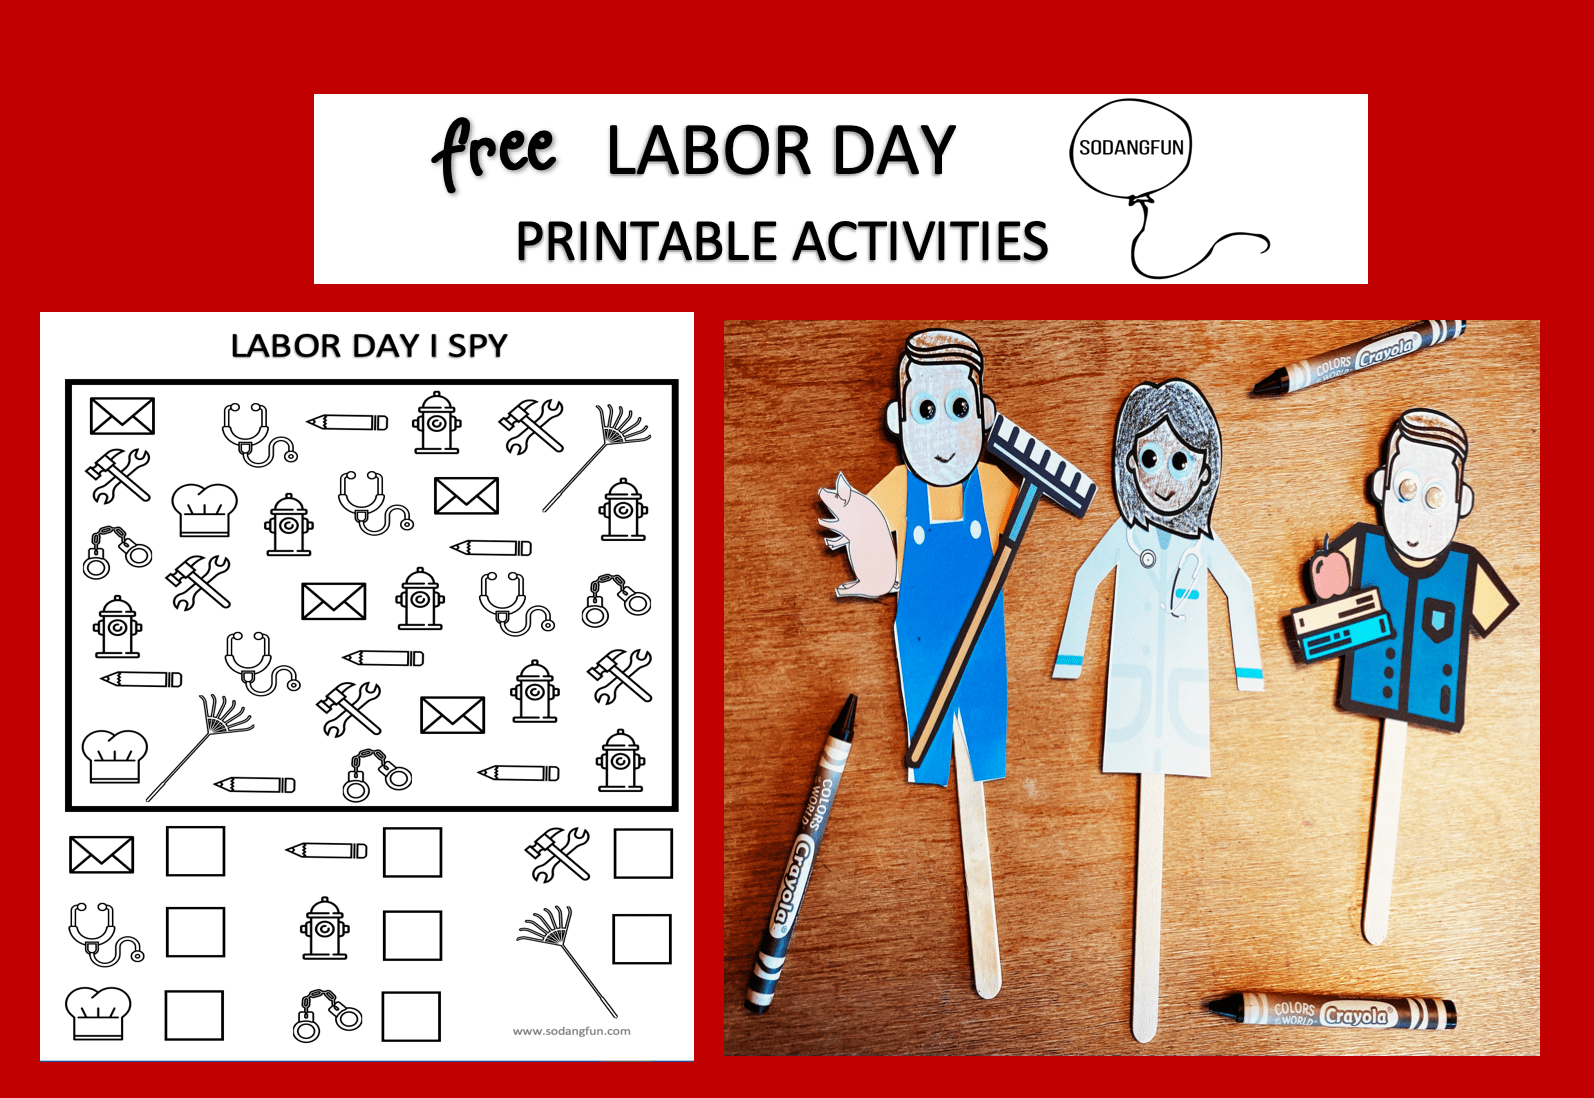 Labor day printable activities for kids